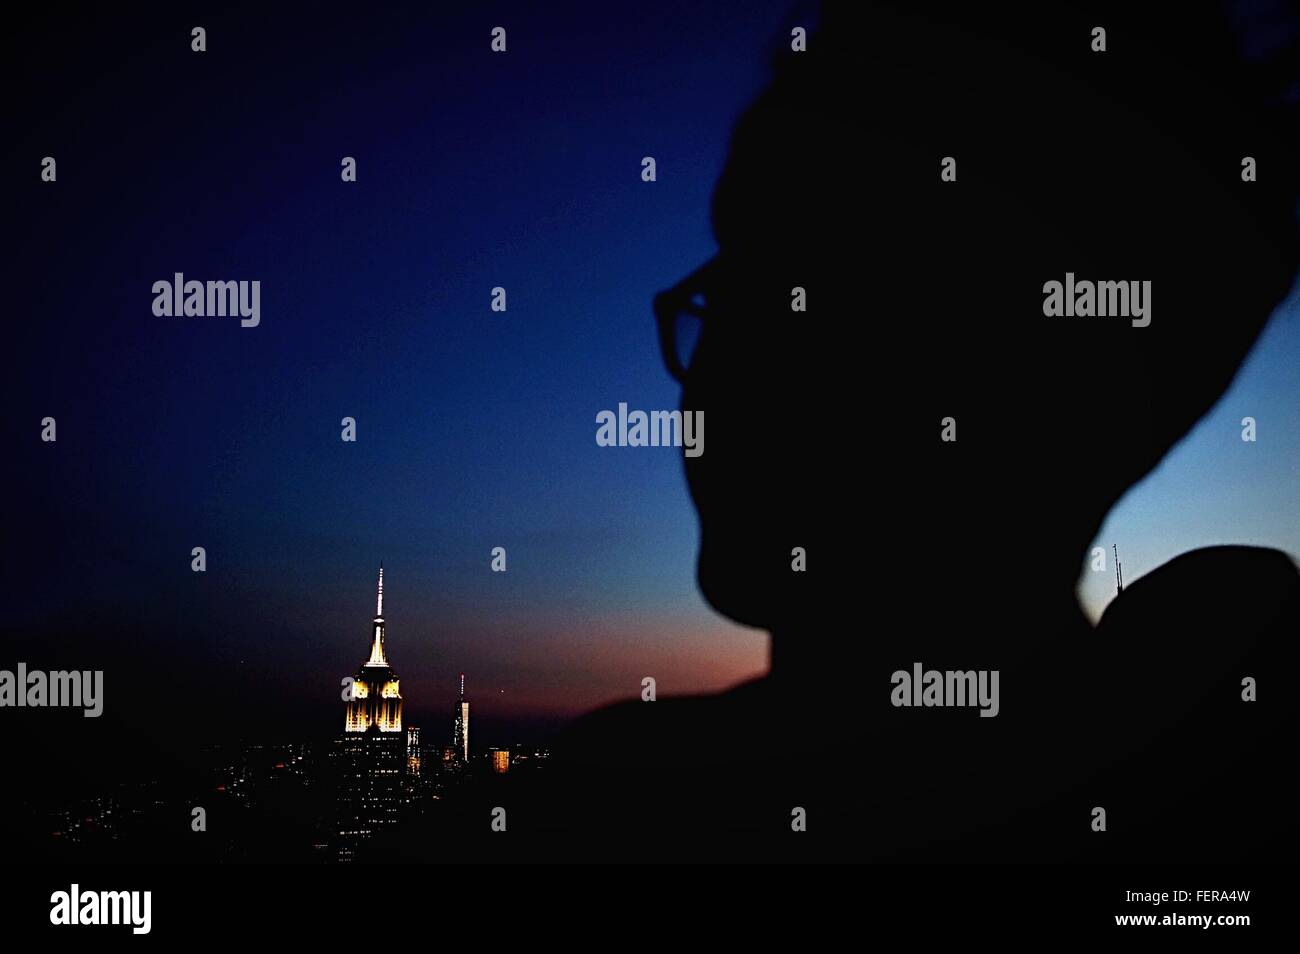 Close-Up Of Silhouette Person Standing On Rooftop Stock Photo